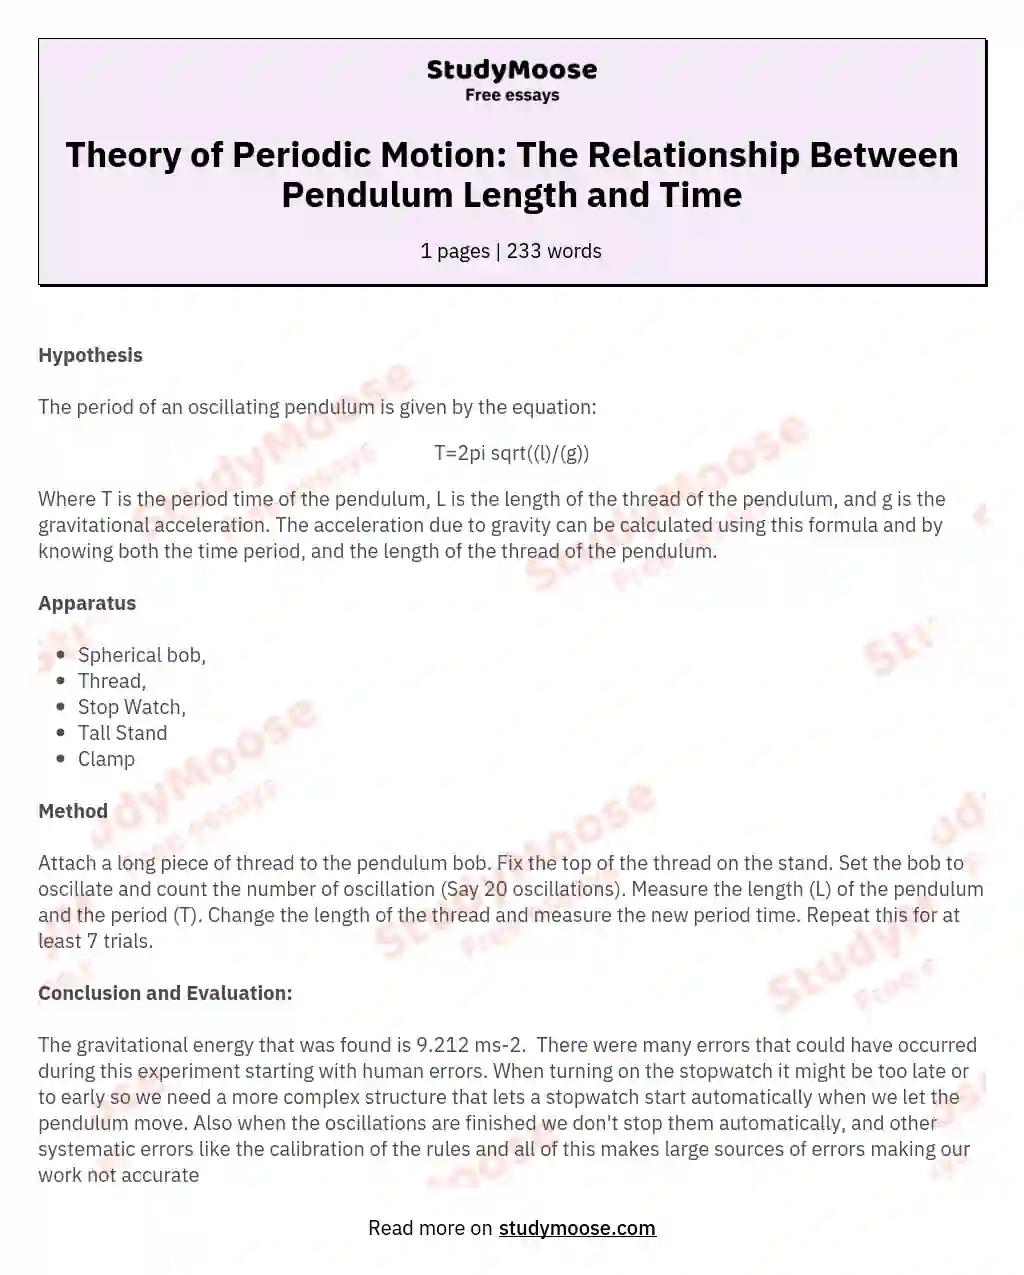 Theory of Periodic Motion: The Relationship Between Pendulum Length and Time